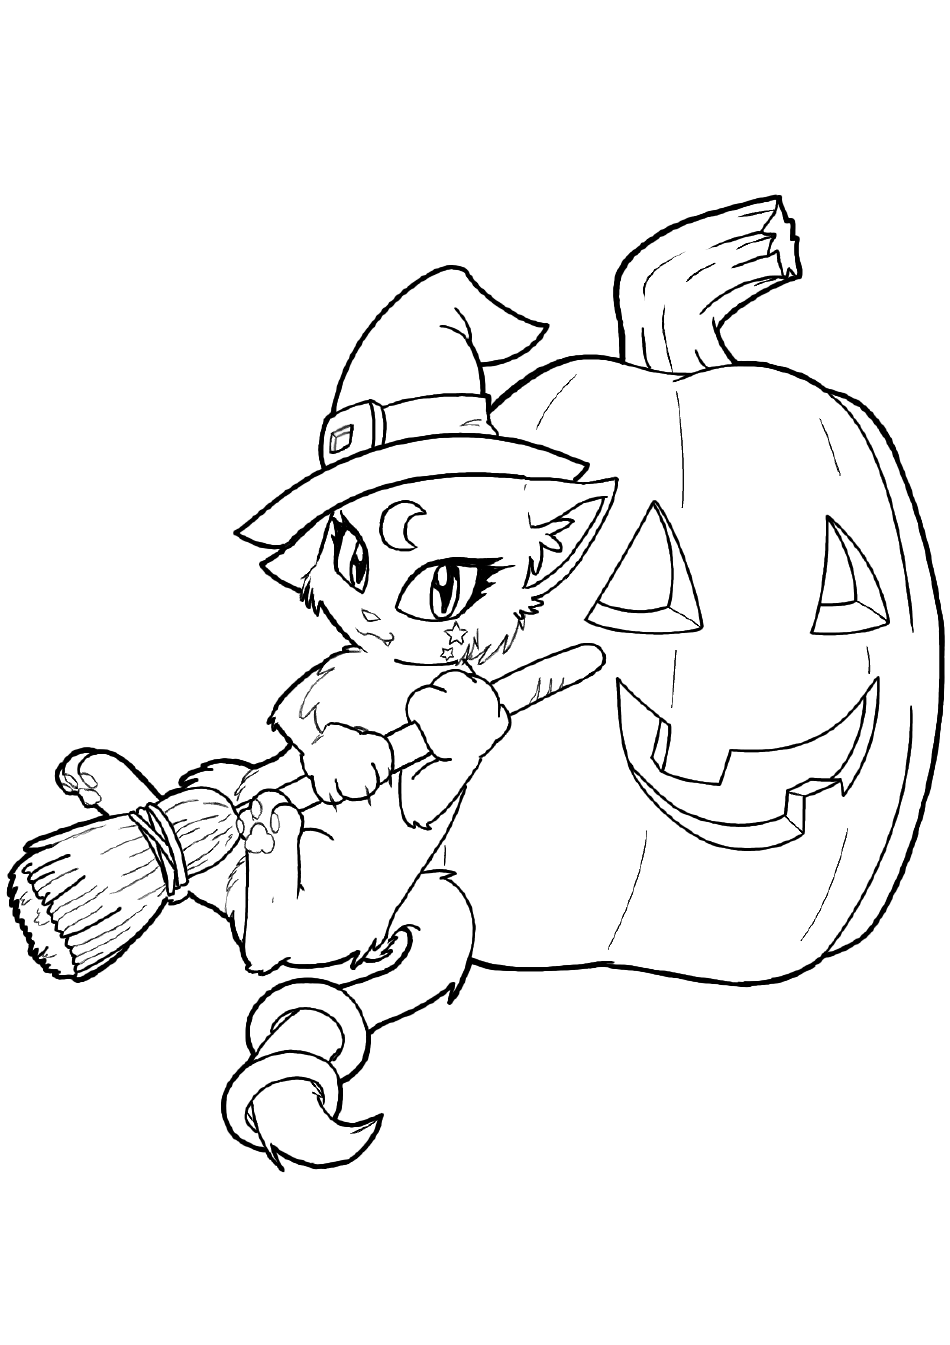 Halloween Coloring Sheet - Cat and Pumpkin, Page 1